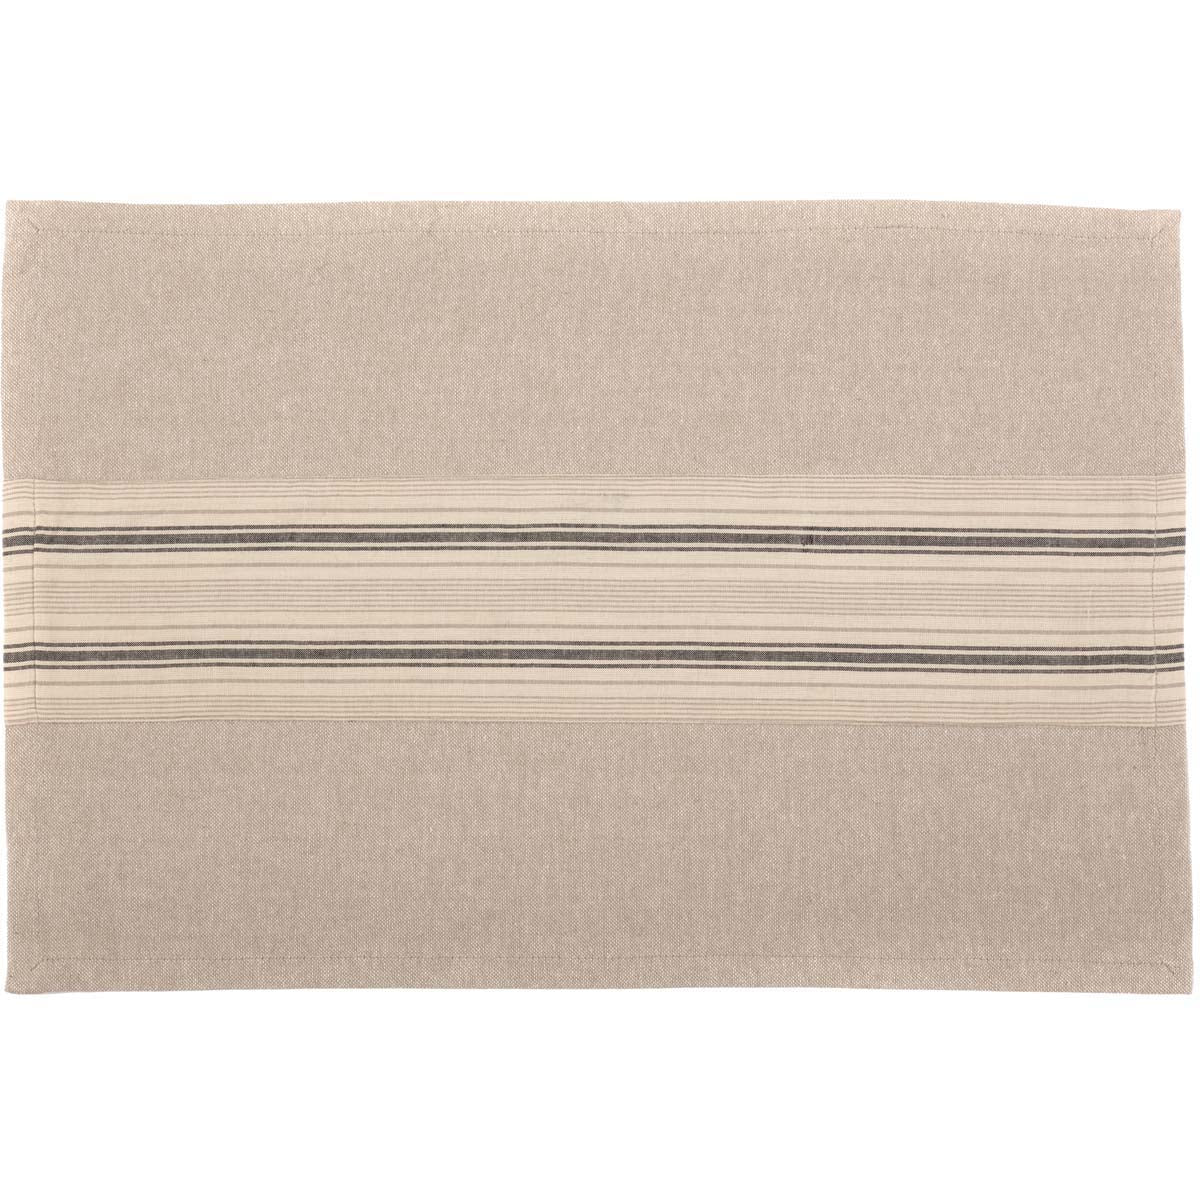 34255-Sawyer-Mill-Charcoal-Stripe-Placemat-Set-of-6-12x18-image-6